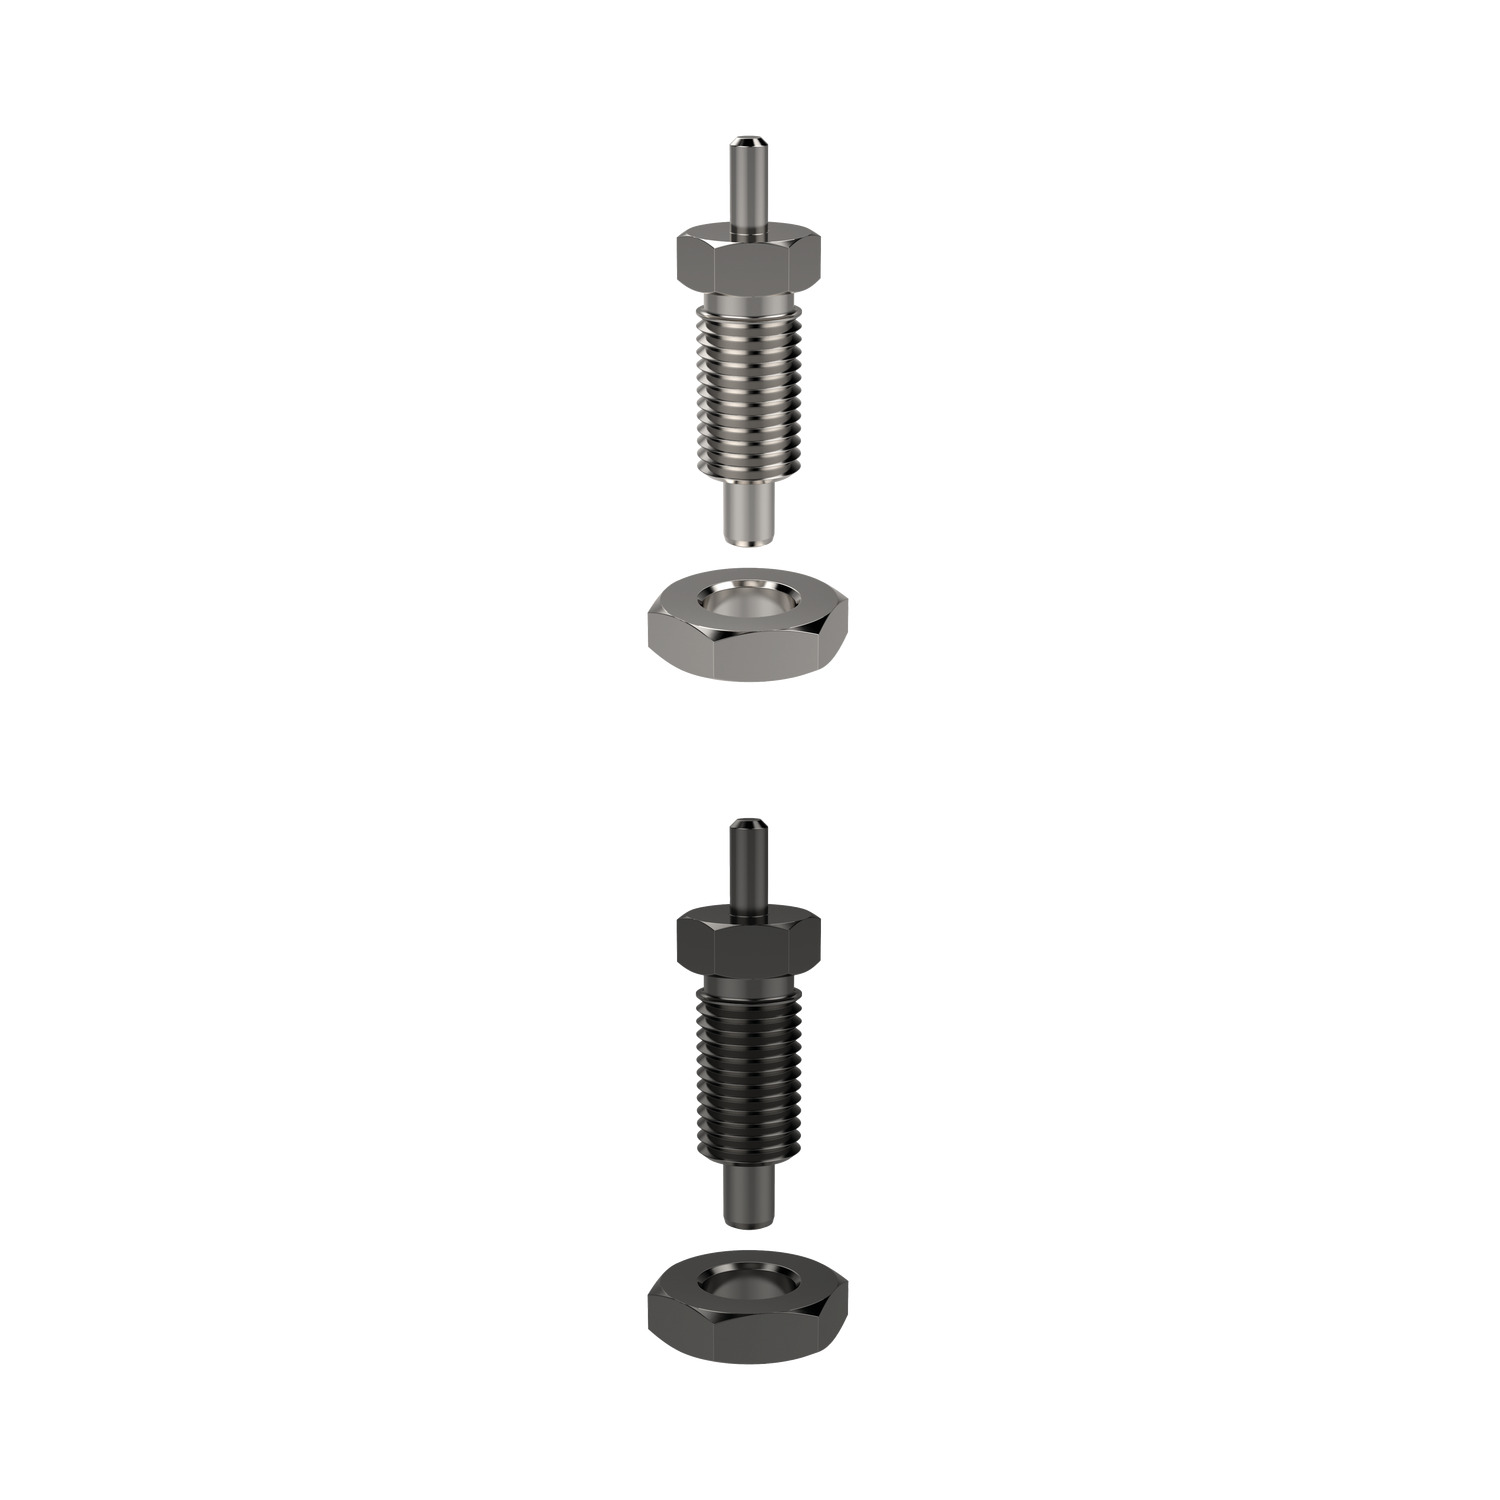 Product 32681, Index Plungers - No Grip compact - non-locking / 